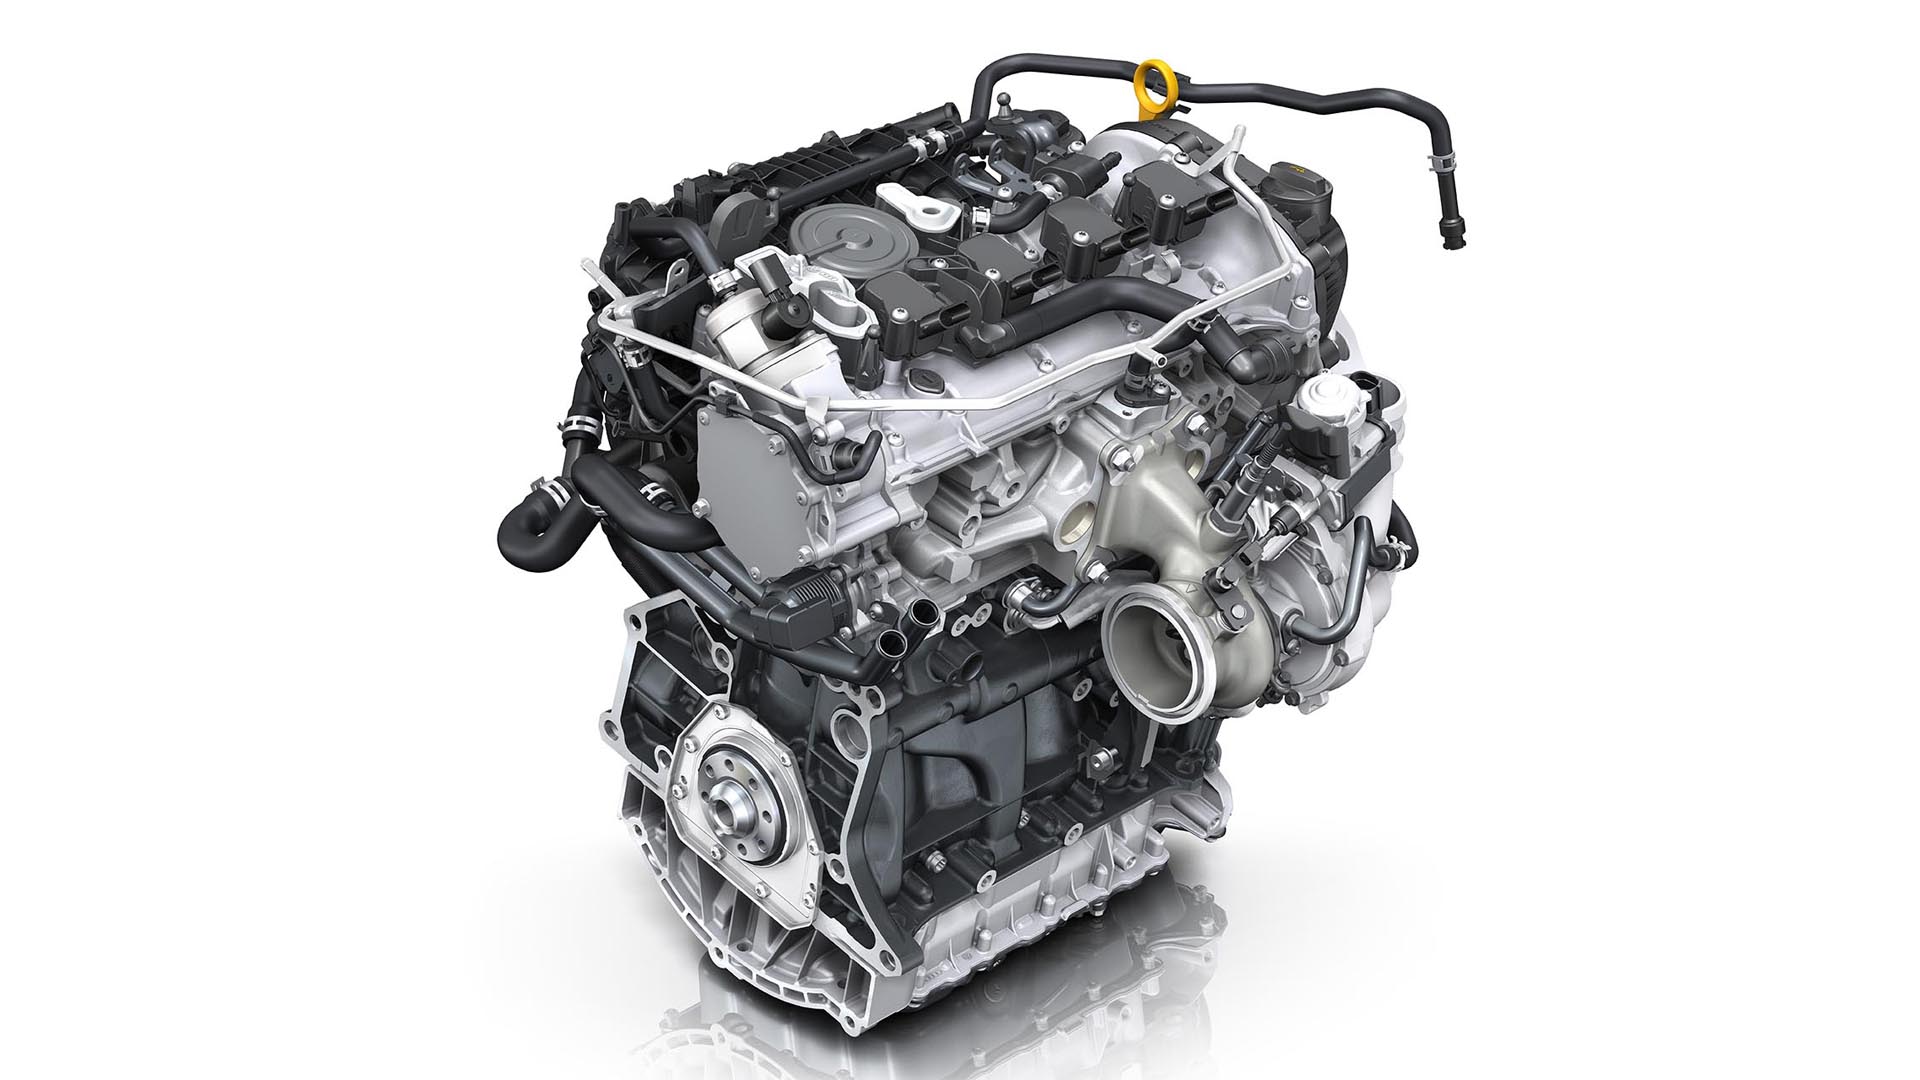 The Definitive Guide To The VW Mk7 GTI EA888 Engine (Gen 3)